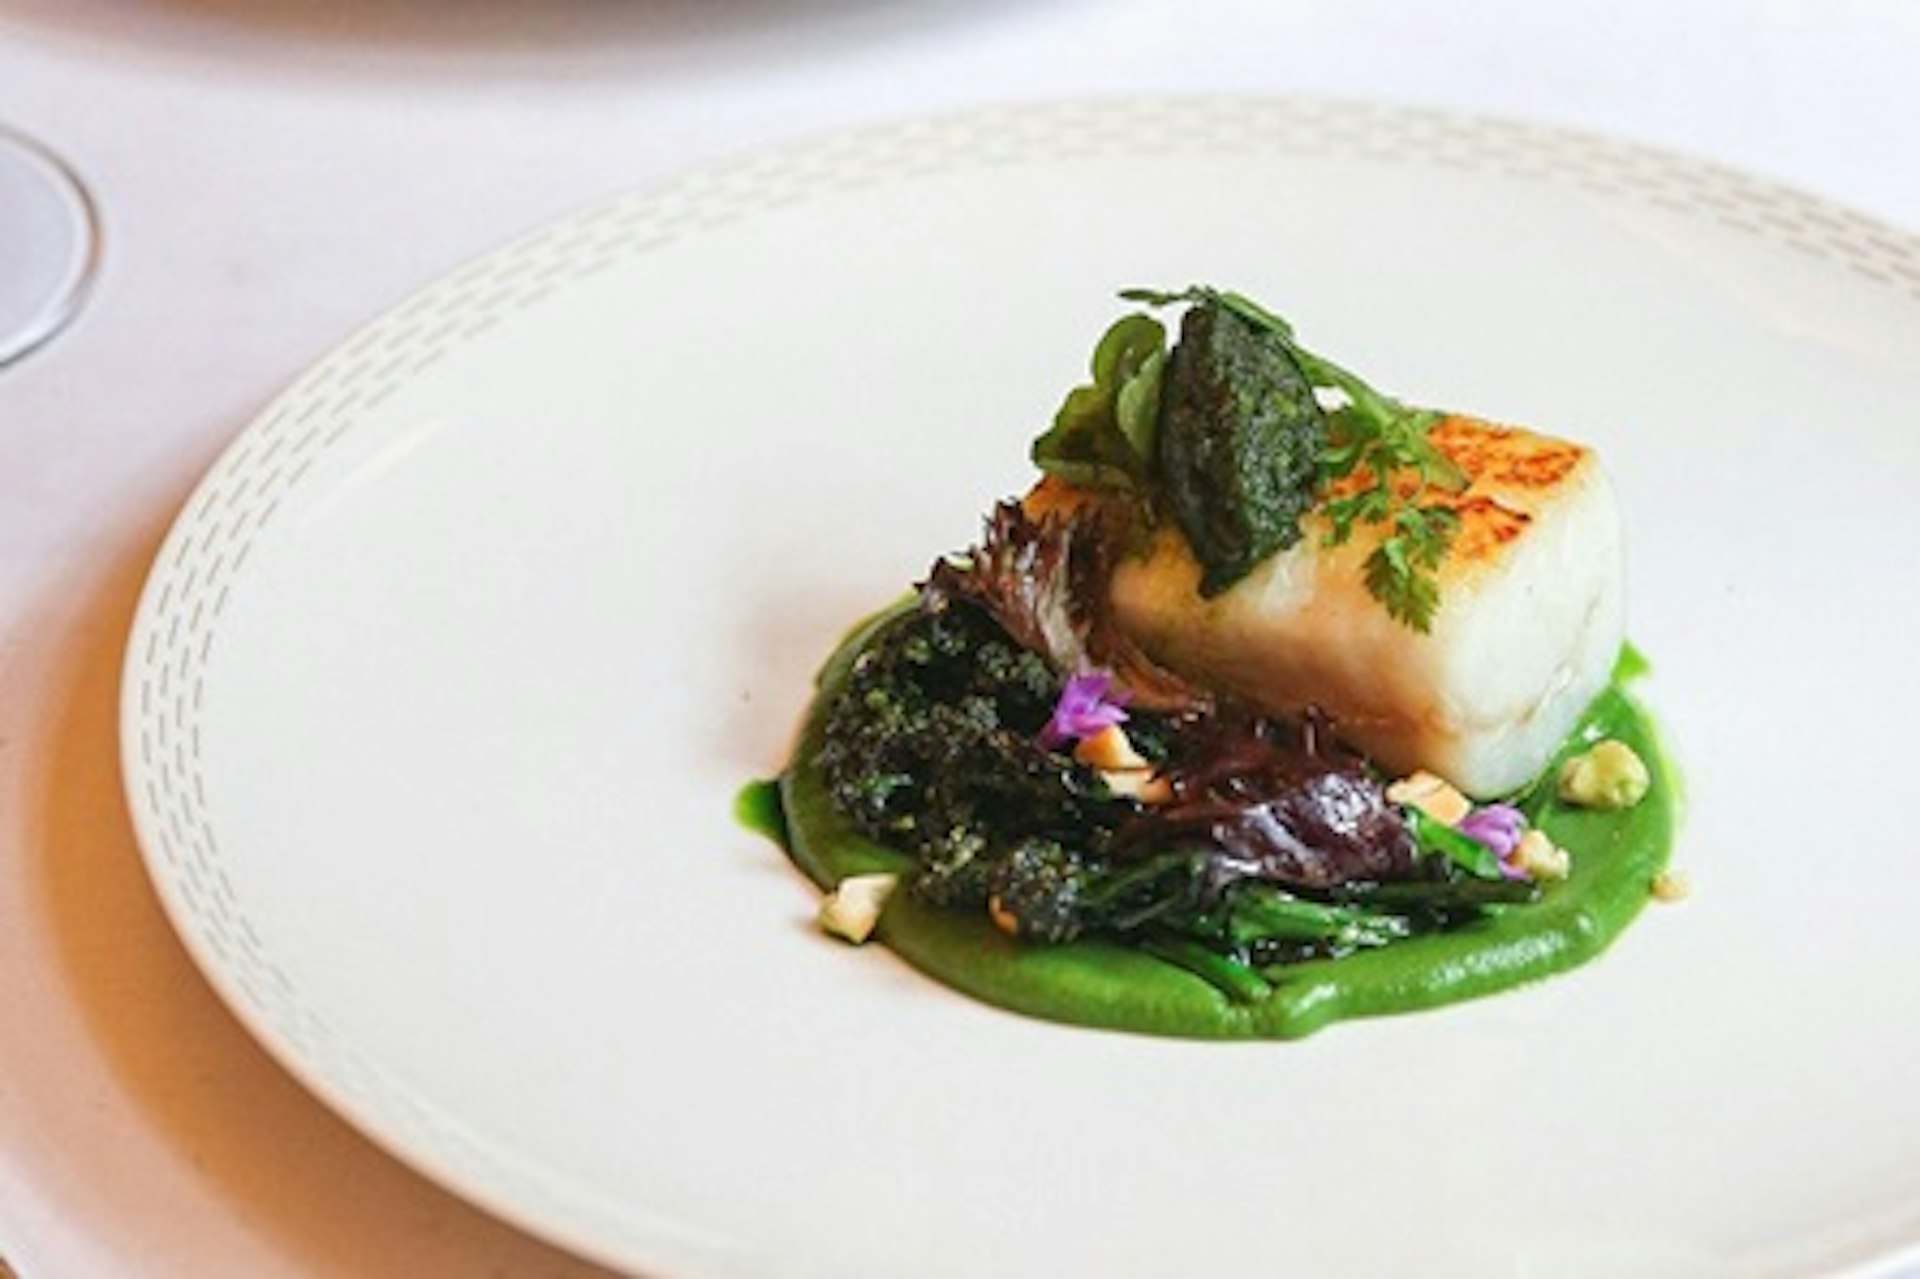 Three Course Lunch for Two at Gordon Ramsay's Savoy Grill 2